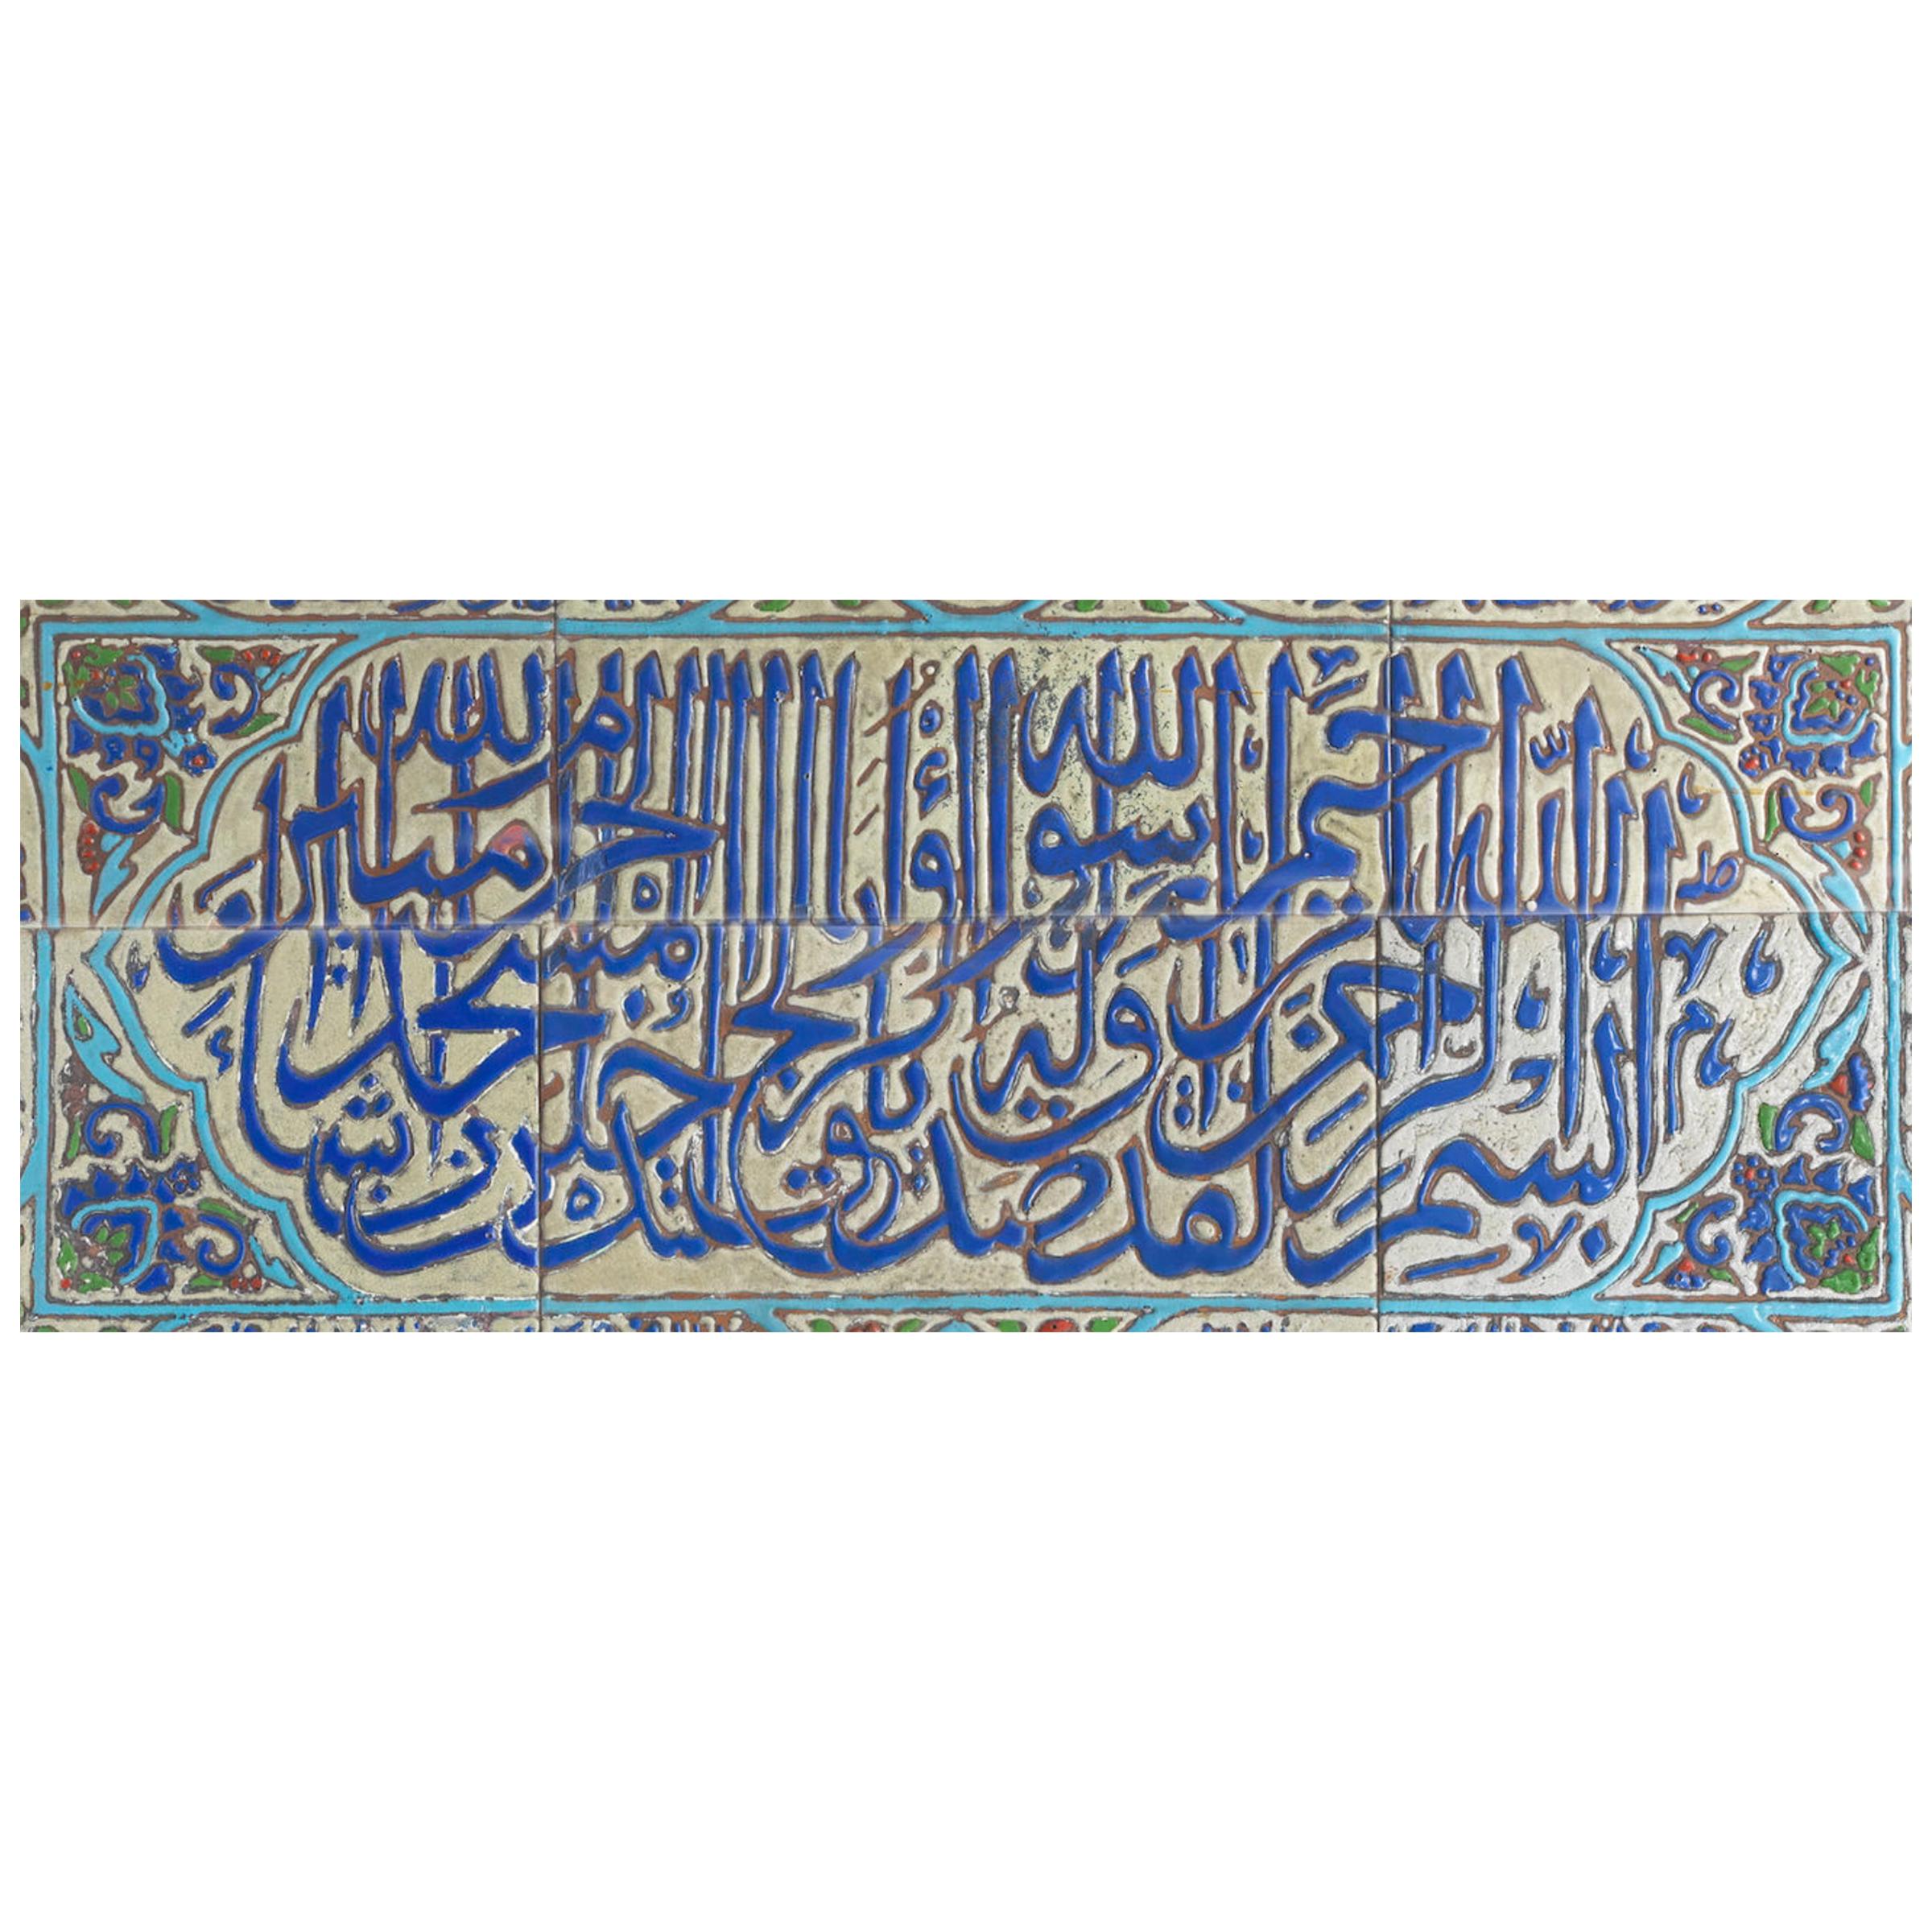 Of rectangular form in five horizontal sections mounted on wood, comprising fifteen copper panels decorated in polychrome enamel with inscription-filled cartouches interspersed by floral and foliate motifs.
 
Inscriptions: Qur'an, chapter XLVIII